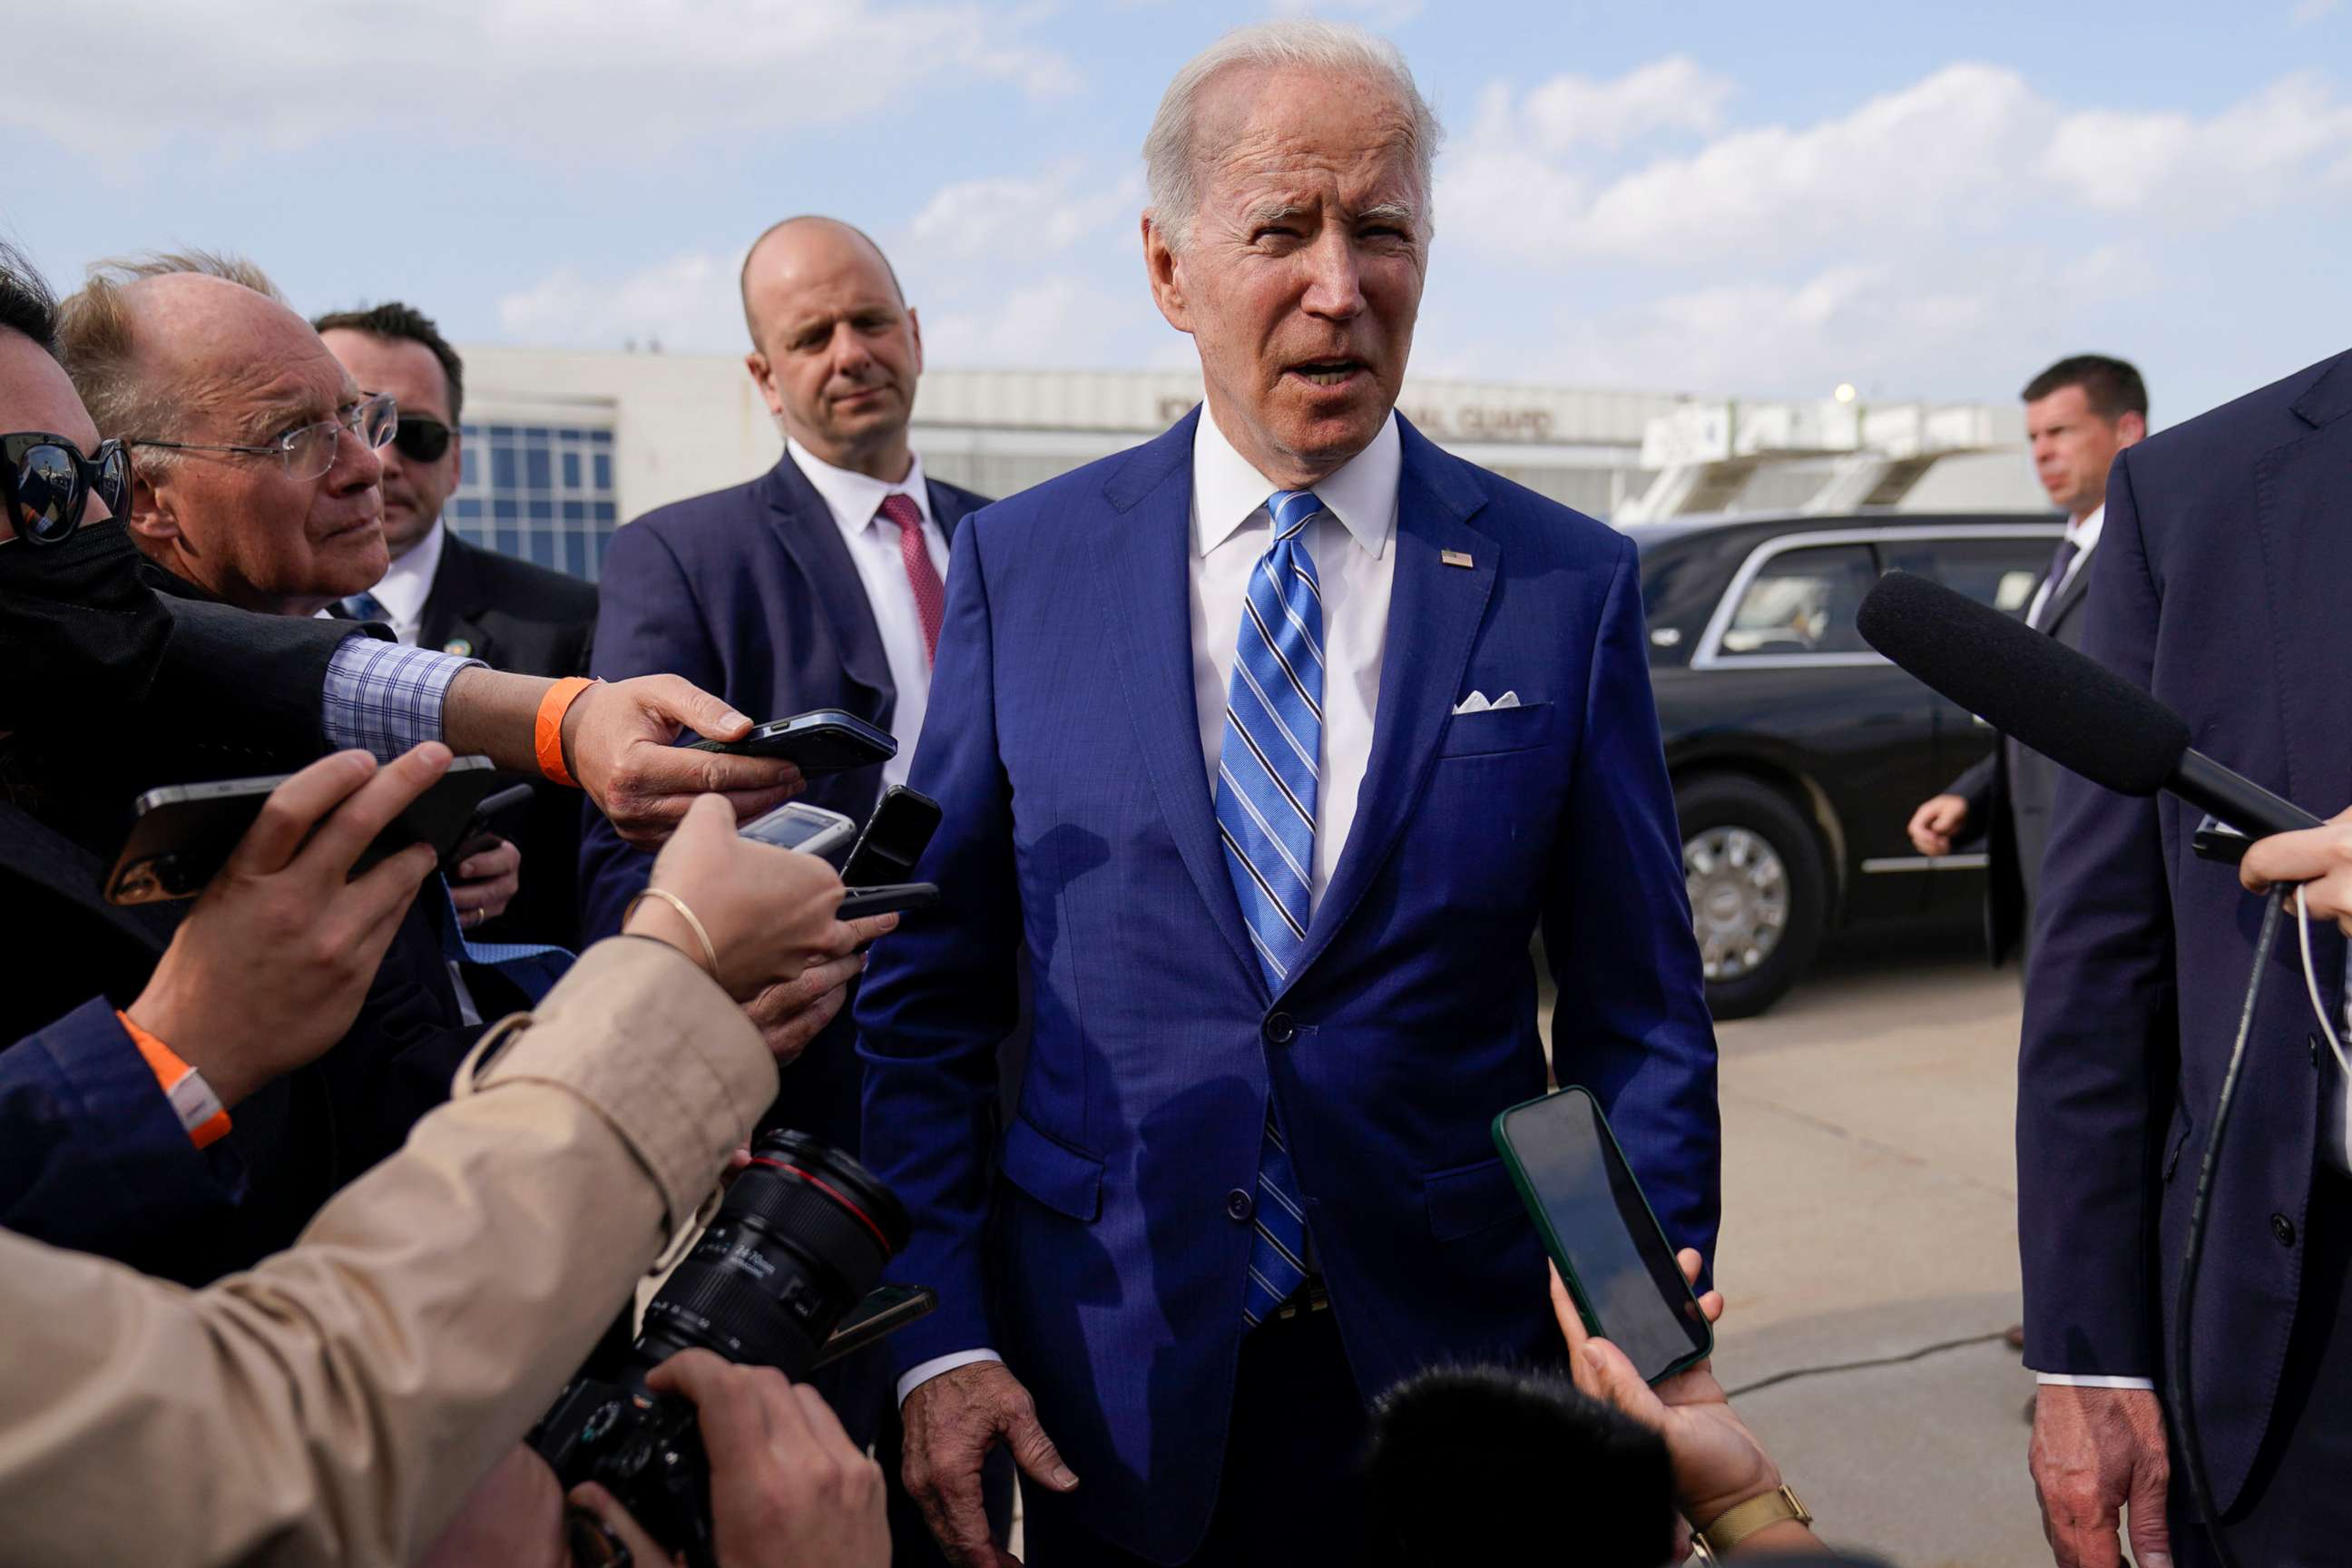 PHOTO: President Joe Biden speaks to reporters before boarding Air Force One at Des Moines International Airport, in Des Moines, Iowa, on April 12, 2022, en route to Washington, D.C.